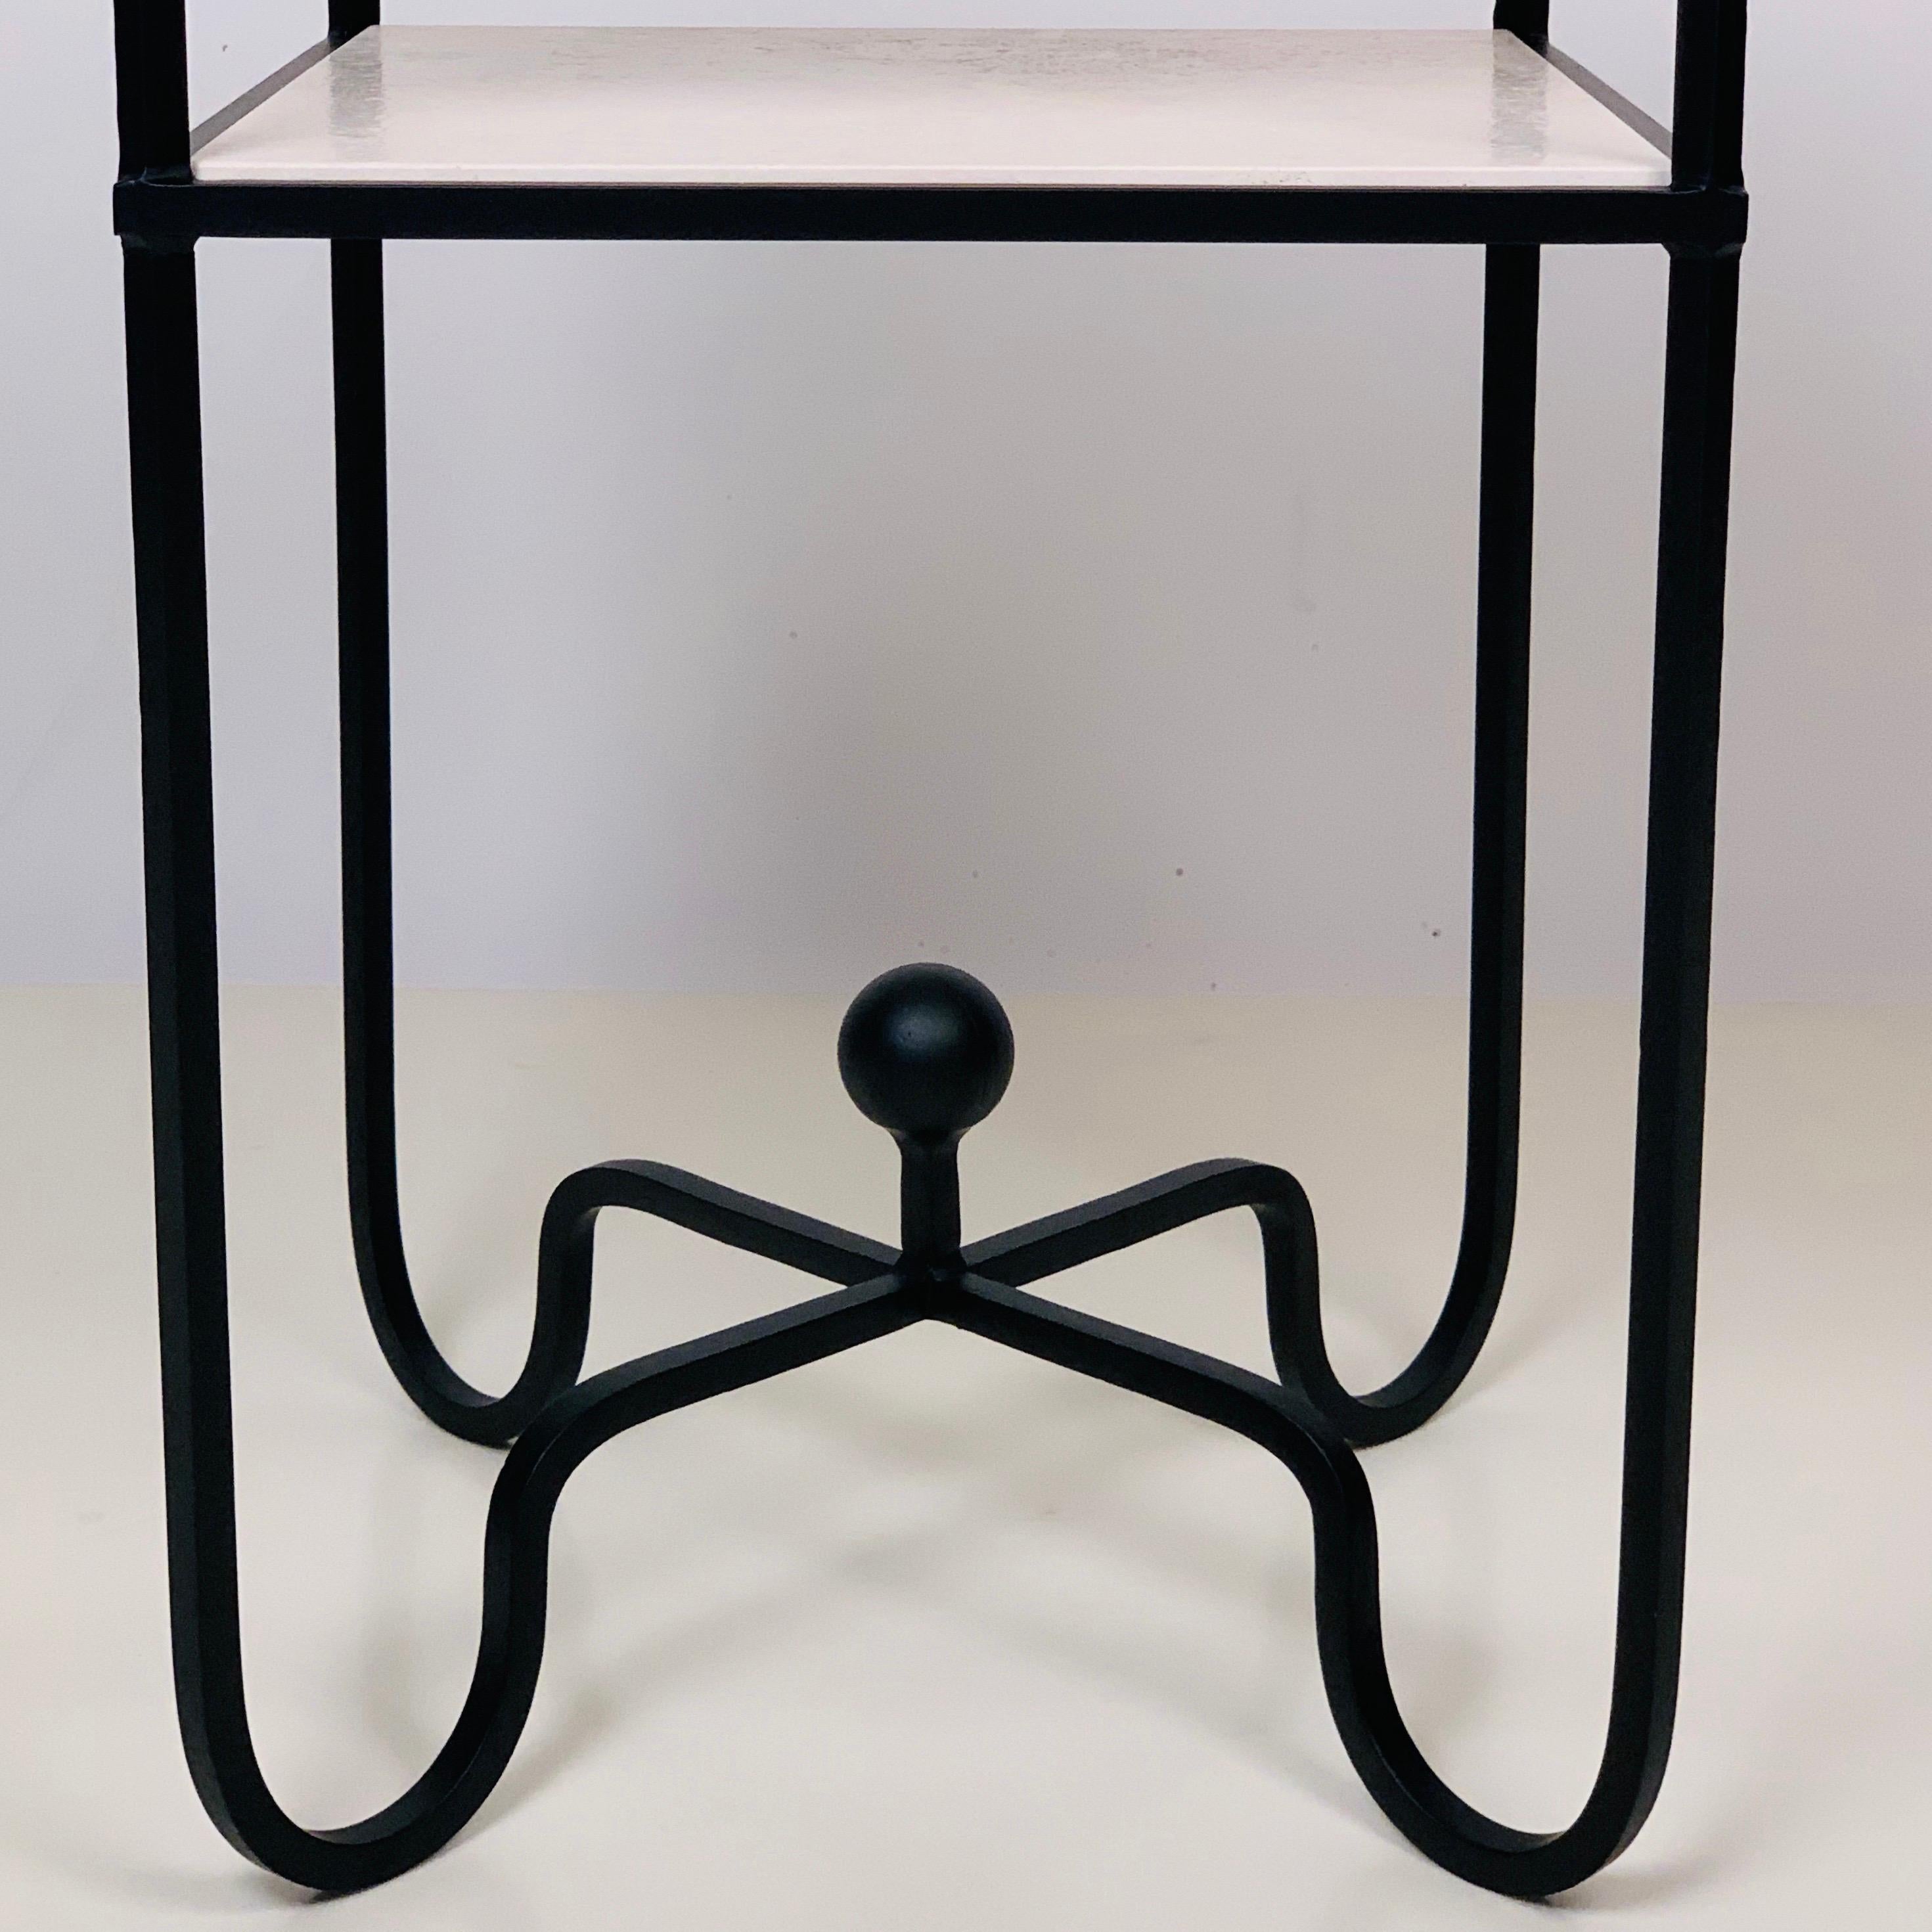 European 2-Tier Entretoise Side Table by Design Frères For Sale